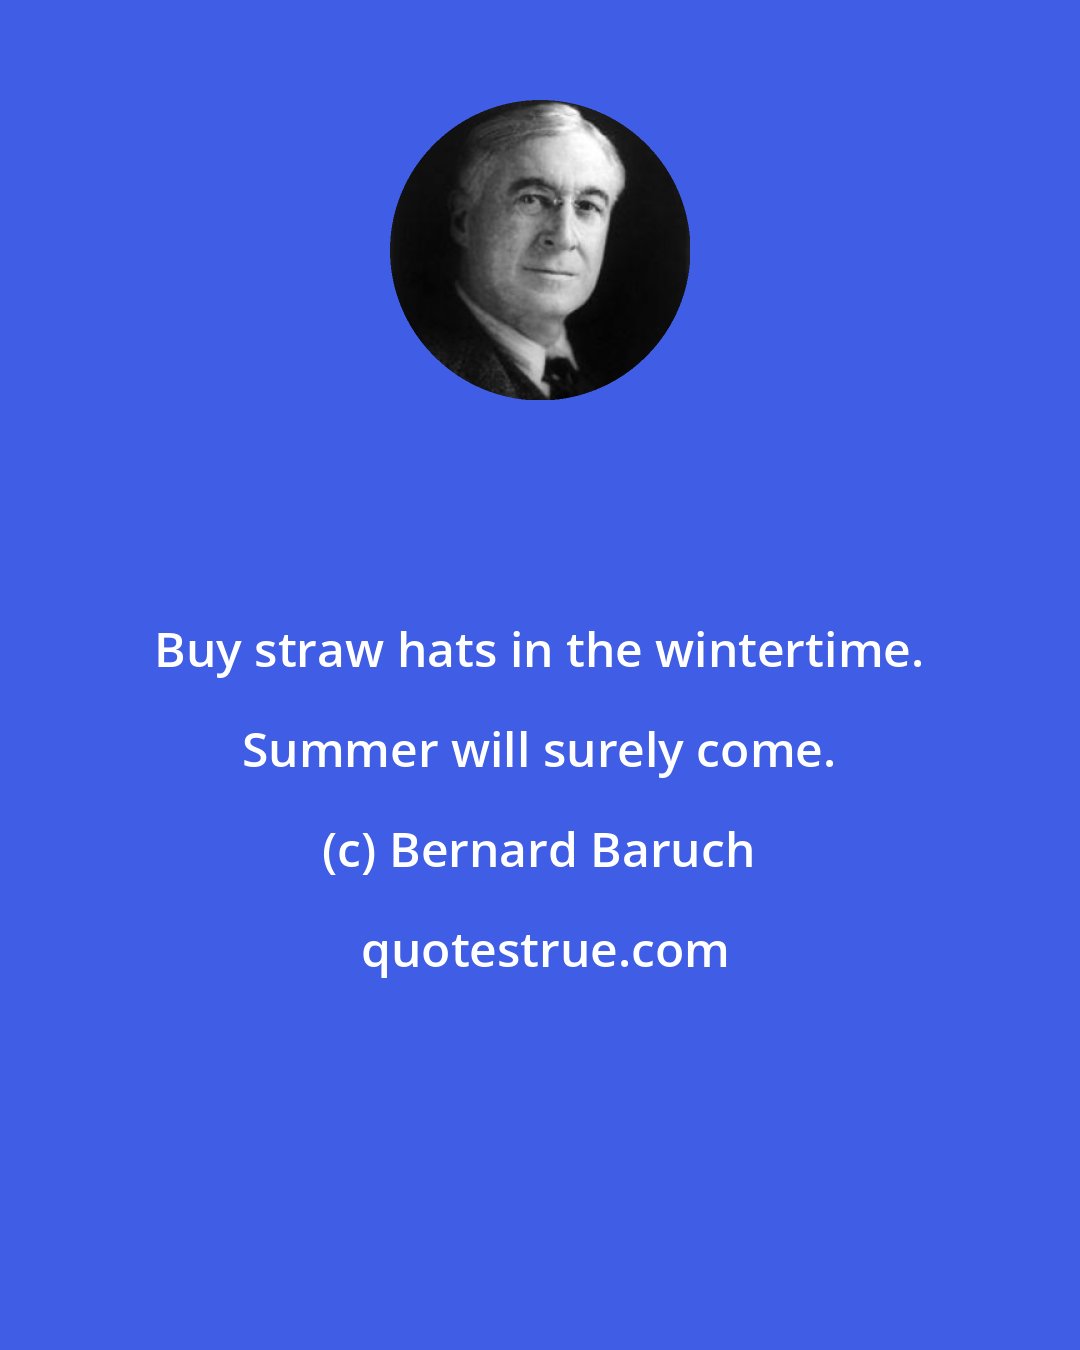 Bernard Baruch: Buy straw hats in the wintertime. Summer will surely come.